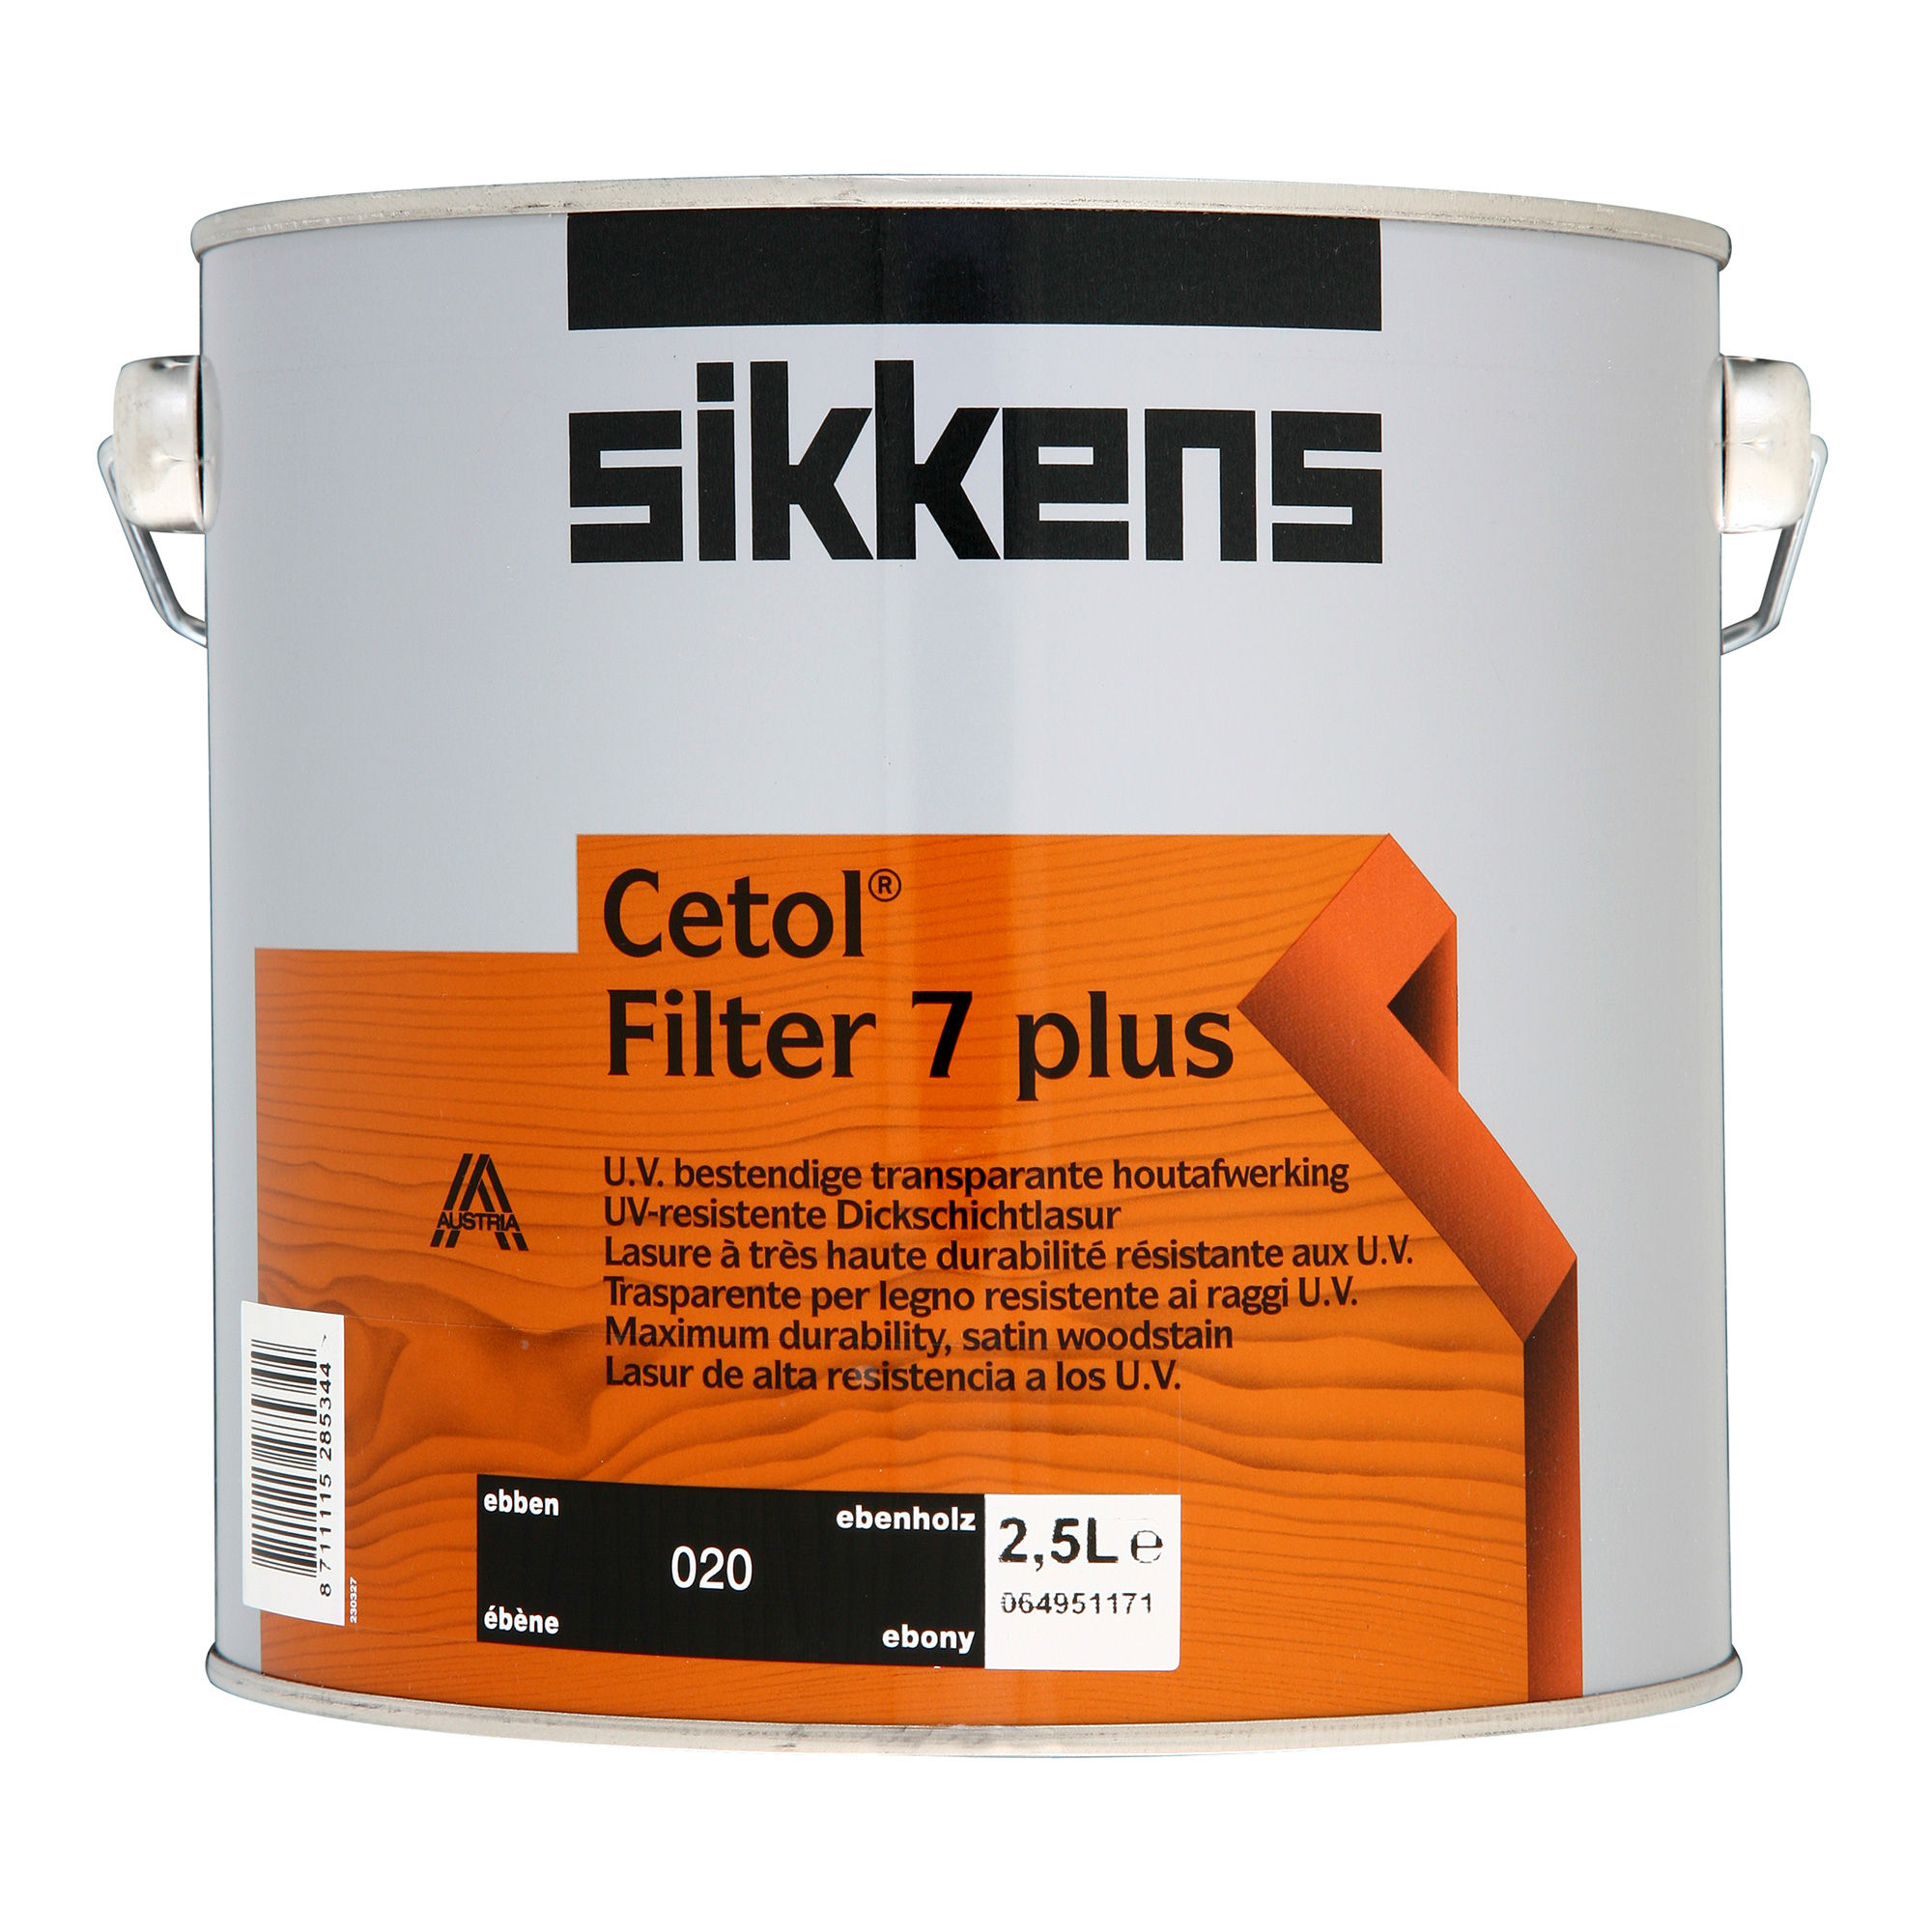 Sikkens Cetol Filter 7 Plus Wood Stain Ebony 020 (2.5L)